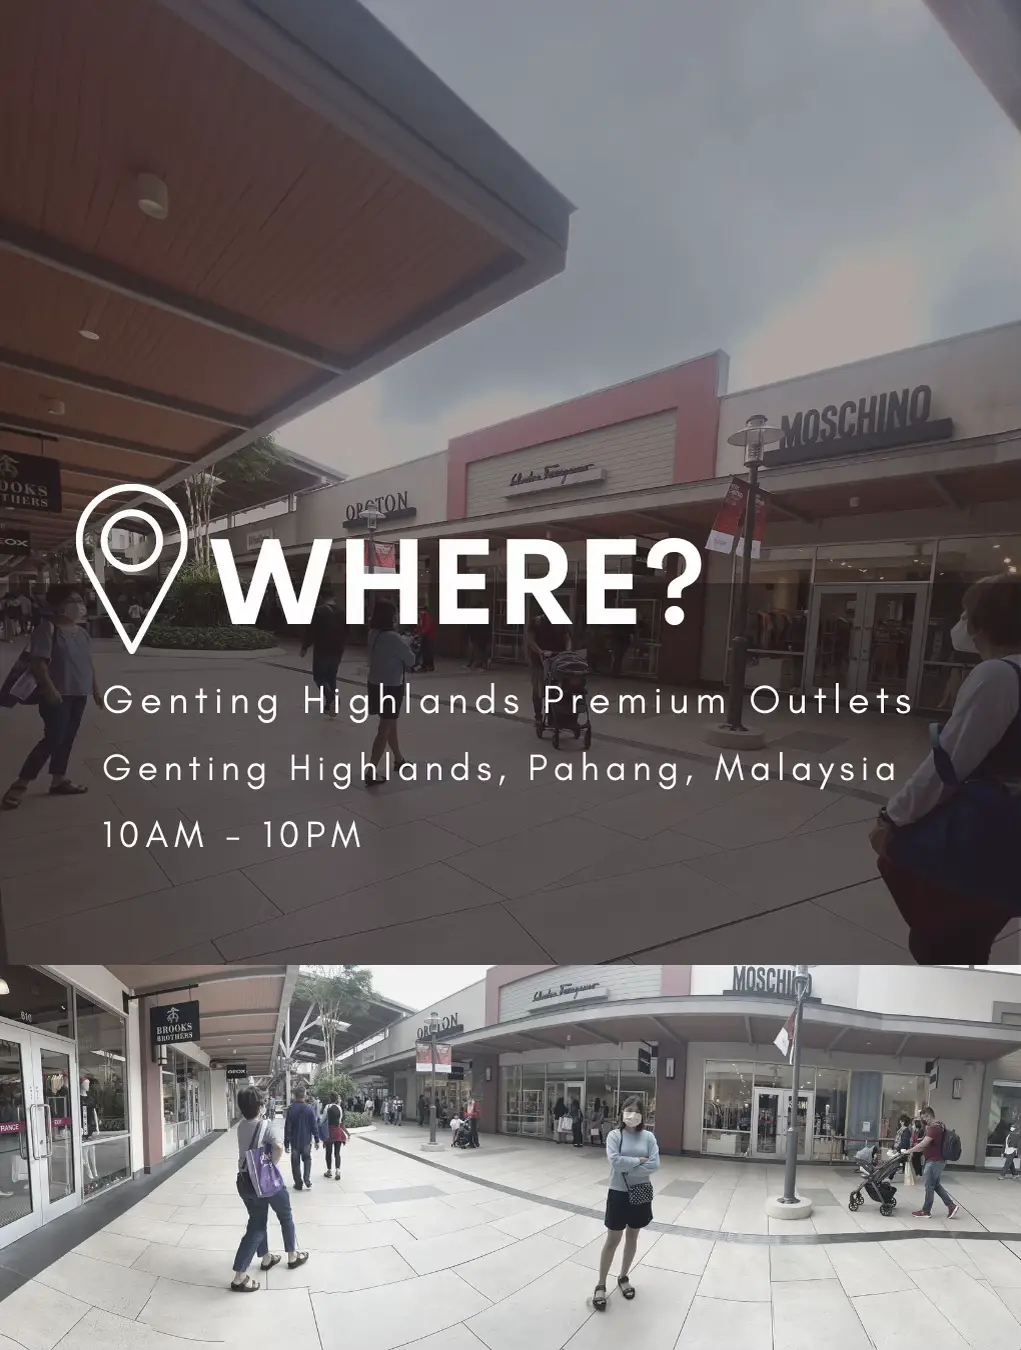 The New Premium Outlet In Genting Is Every Shopaholic's Dream Come True